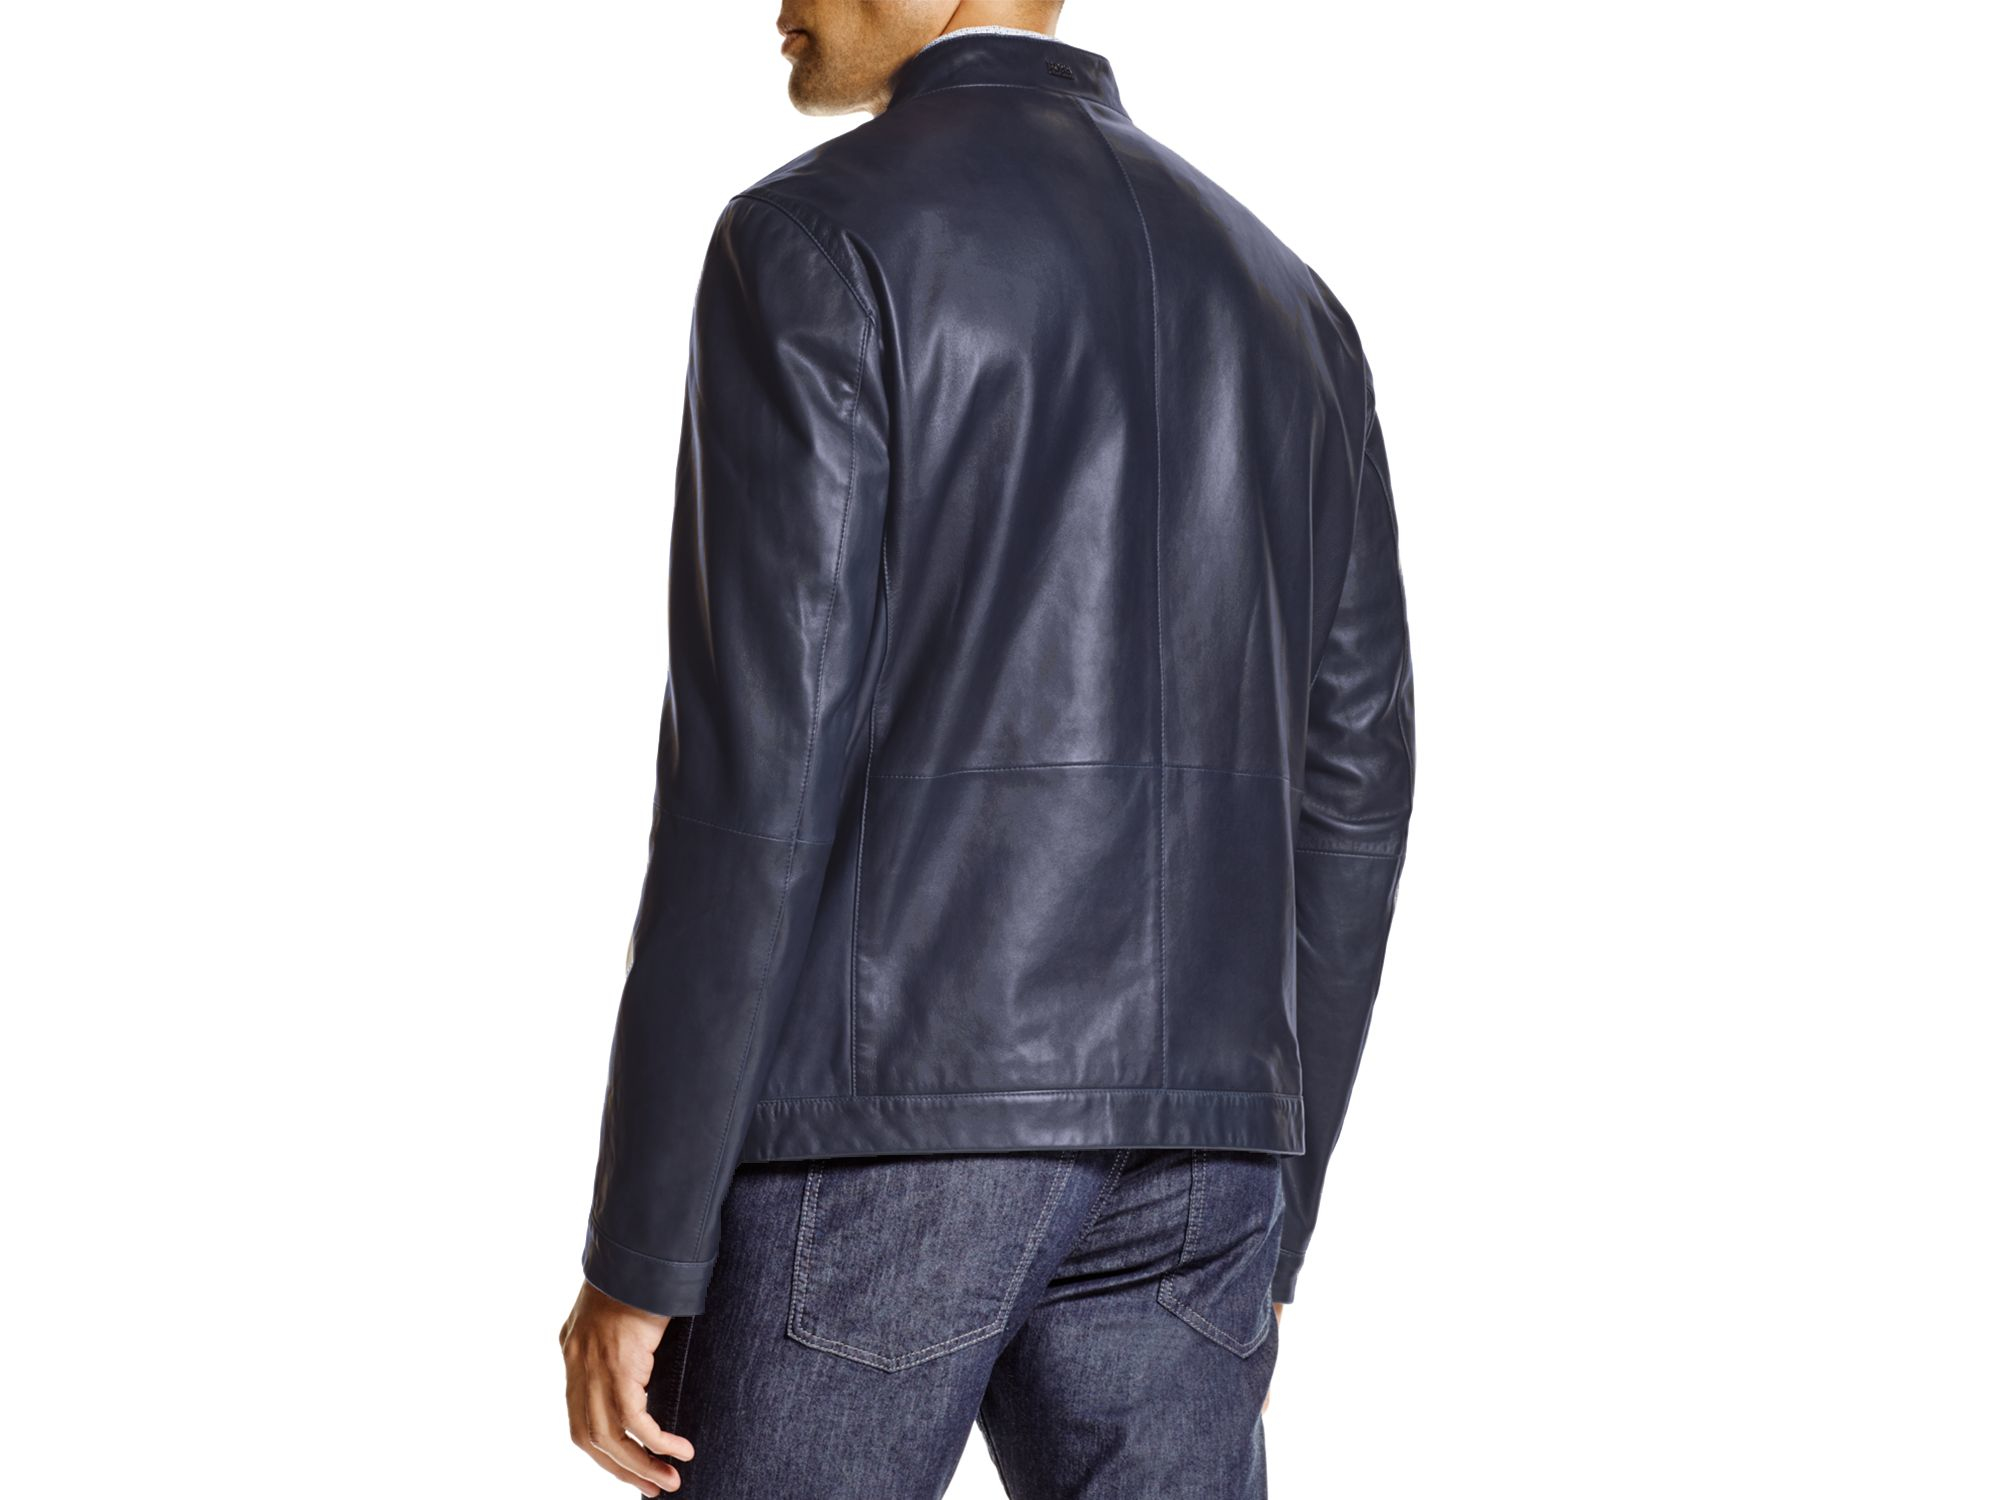 hugo boss navy leather jacket Cheaper Than Retail Price> Buy Clothing,  Accessories and lifestyle products for women & men -